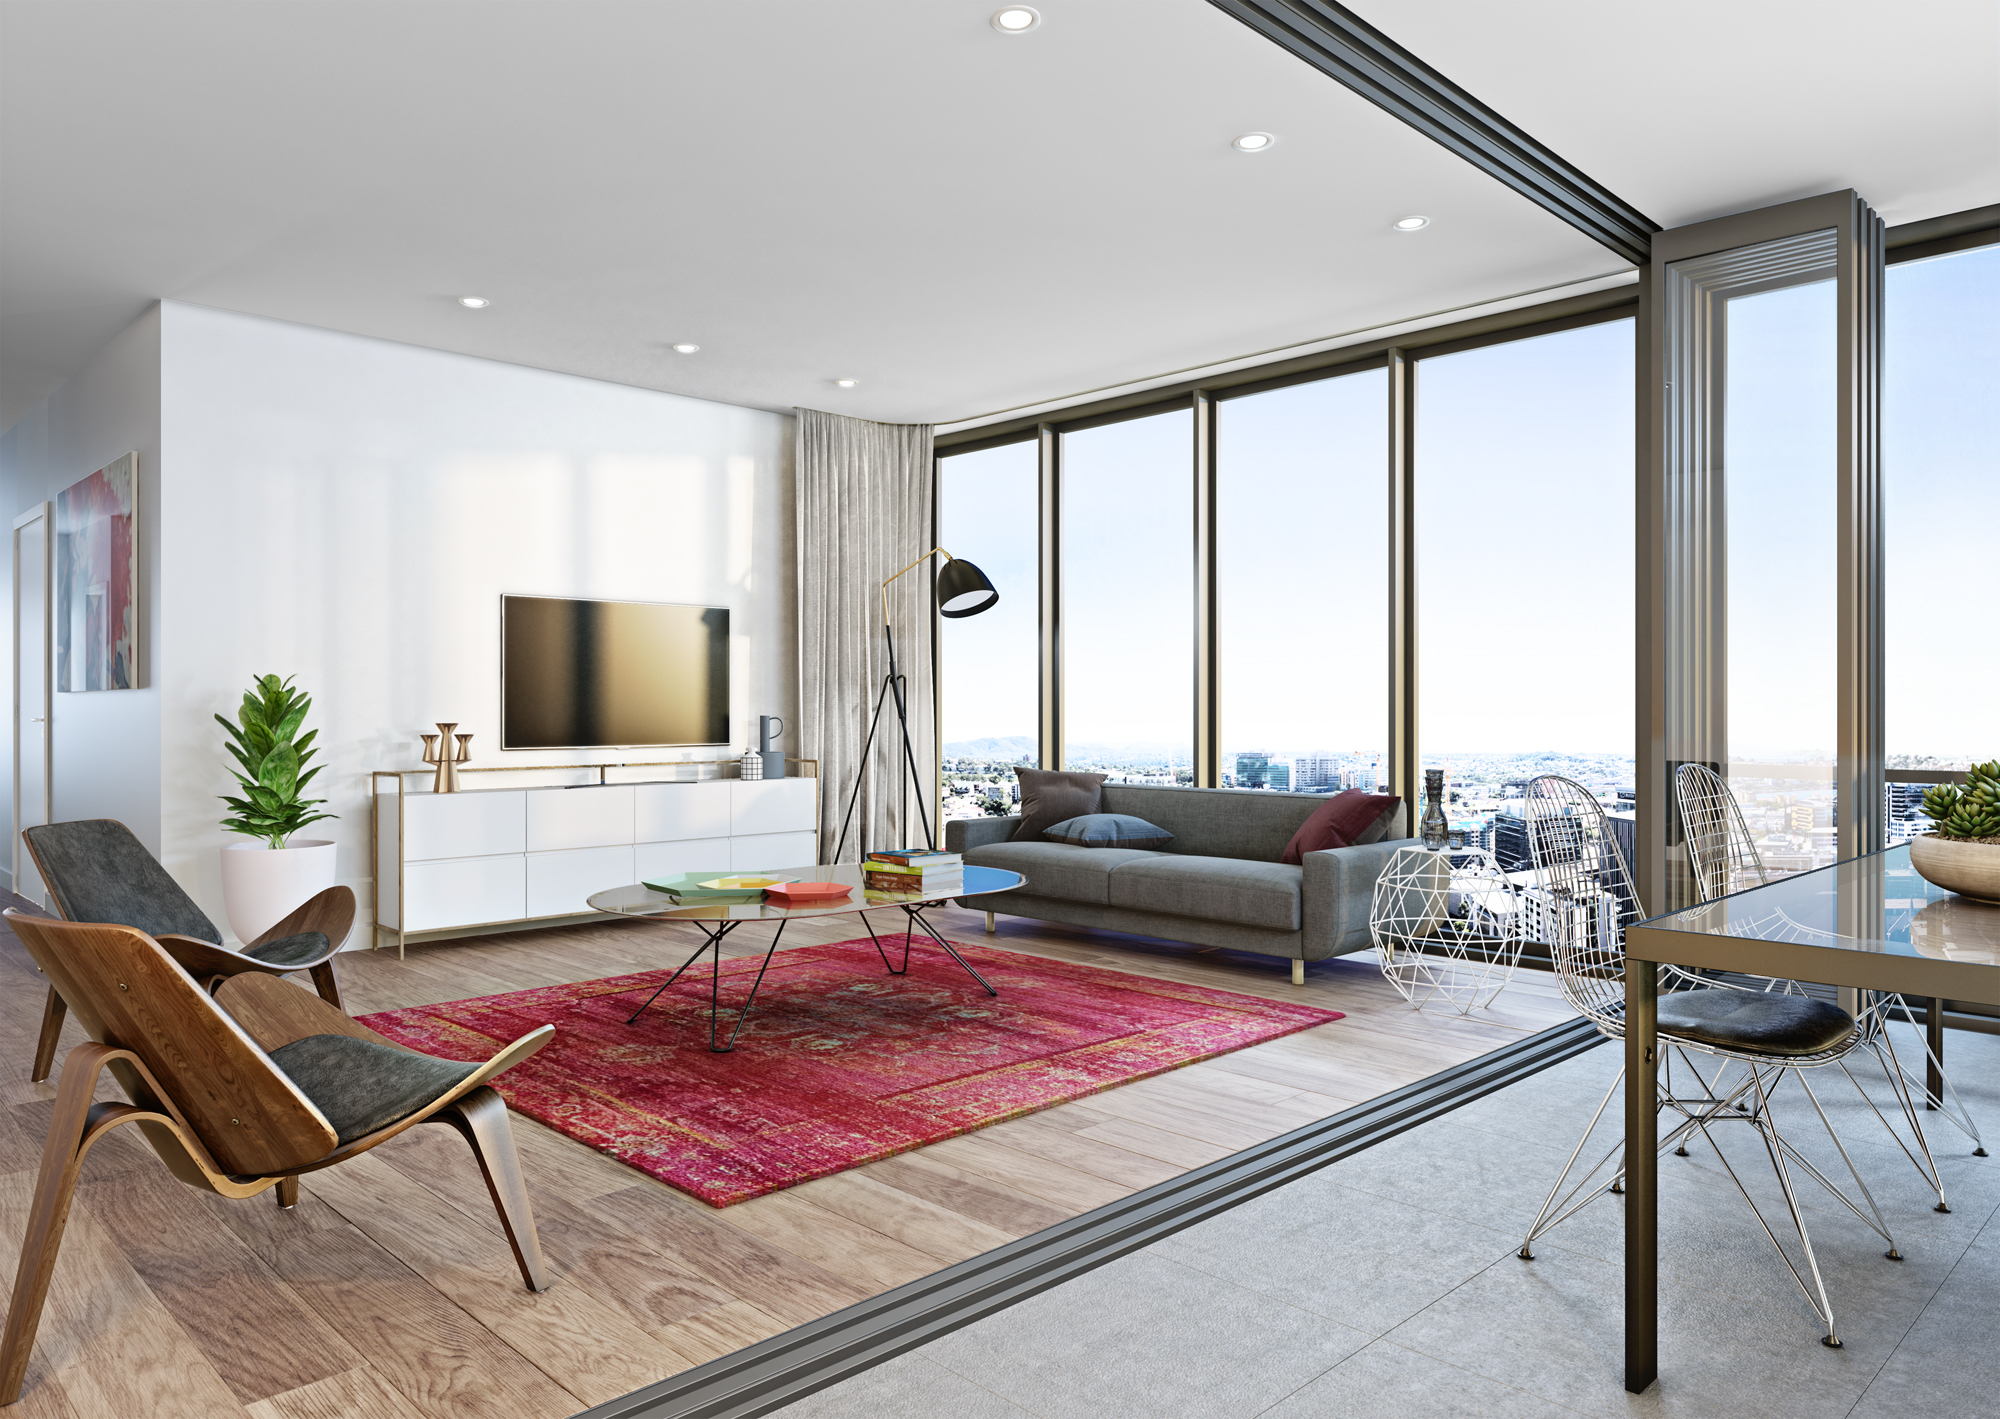 Apartment living room with an open operable panel glass sliding door, providing seamless connectivity to the balcony and allowing for airflow and abundant natural daylight